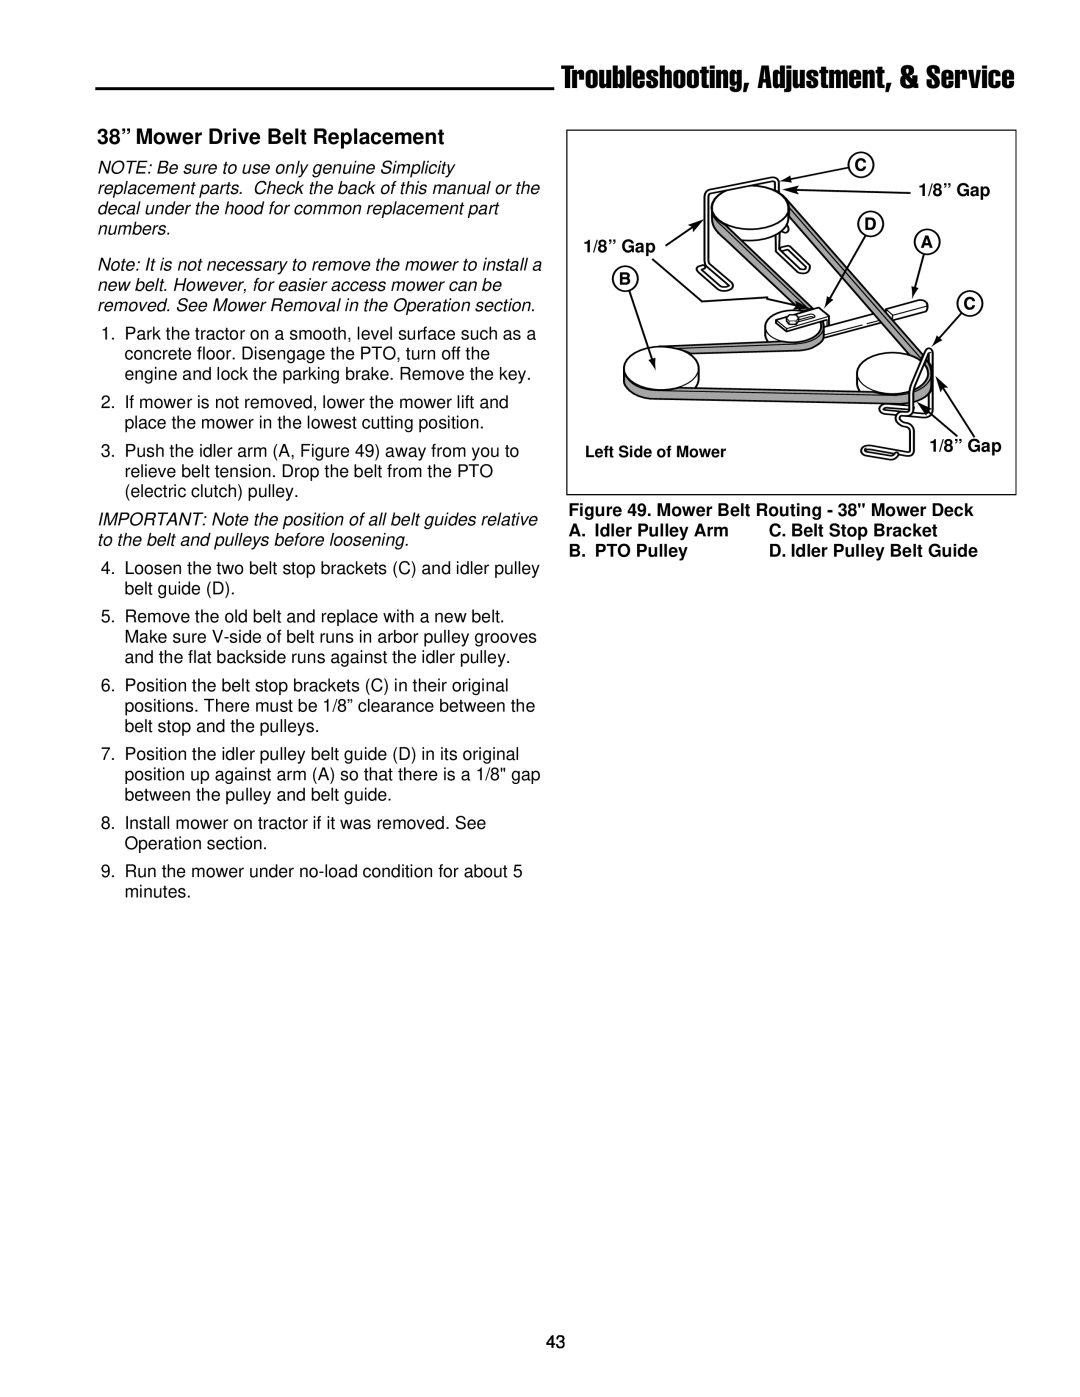 Simplicity 300 Series Troubleshooting, Adjustment, & Service, 38” Mower Drive Belt Replacement, 1/8” Gap, Idler Pulley Arm 